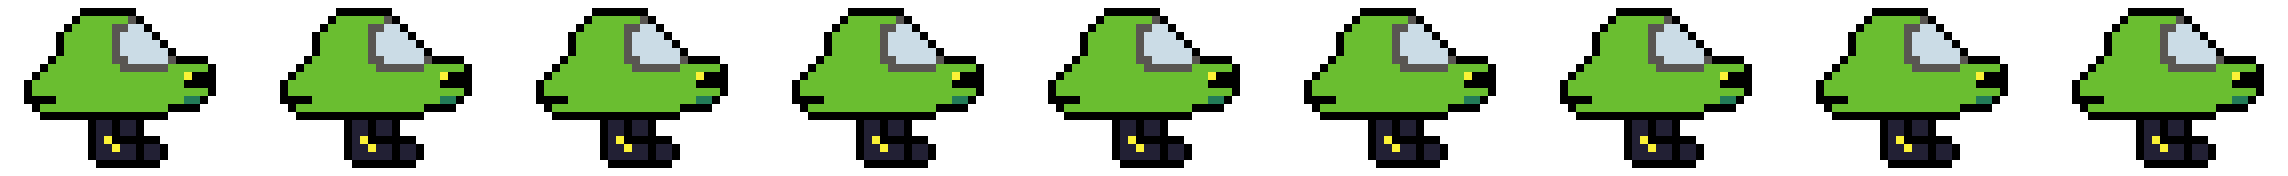 divider with green walking cars from the game Deltarune